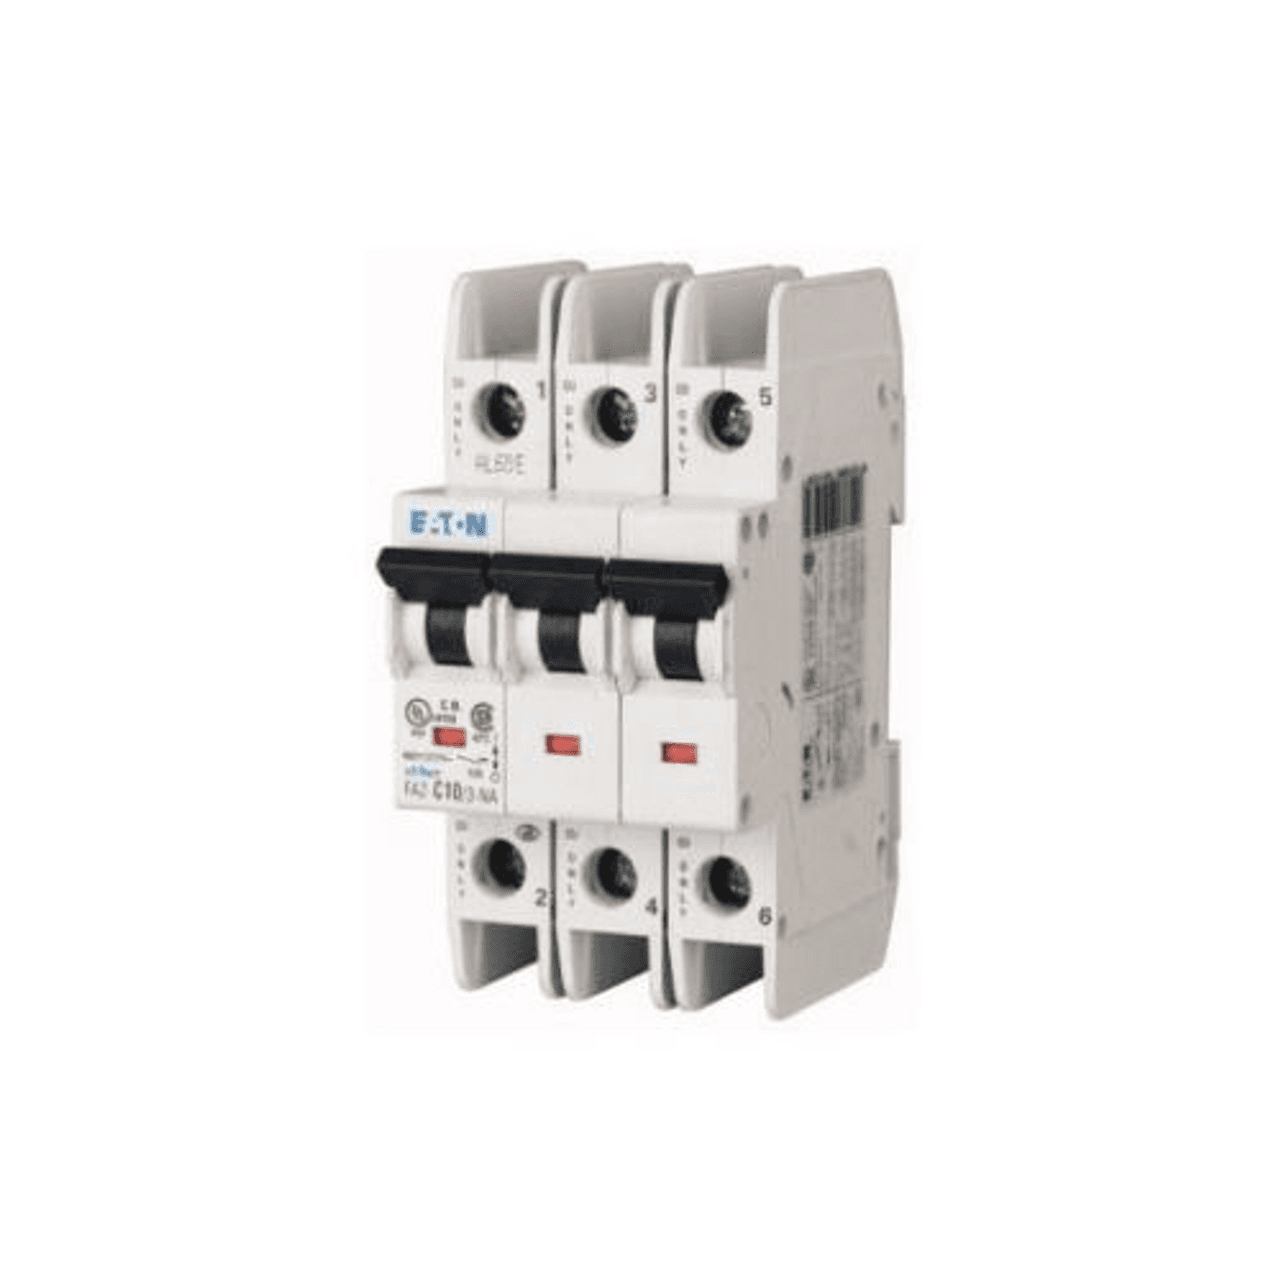 Eaton FAZ-C10/3-NA 277/480 VAC 50/60 Hz, 10 A, 3-Pole, 10/14 kA, 5 to 10 x Rated Current, Screw Terminal, DIN Rail Mount, Standard Packaging, C-Curve, Current Limiting, Thermal Magnetic